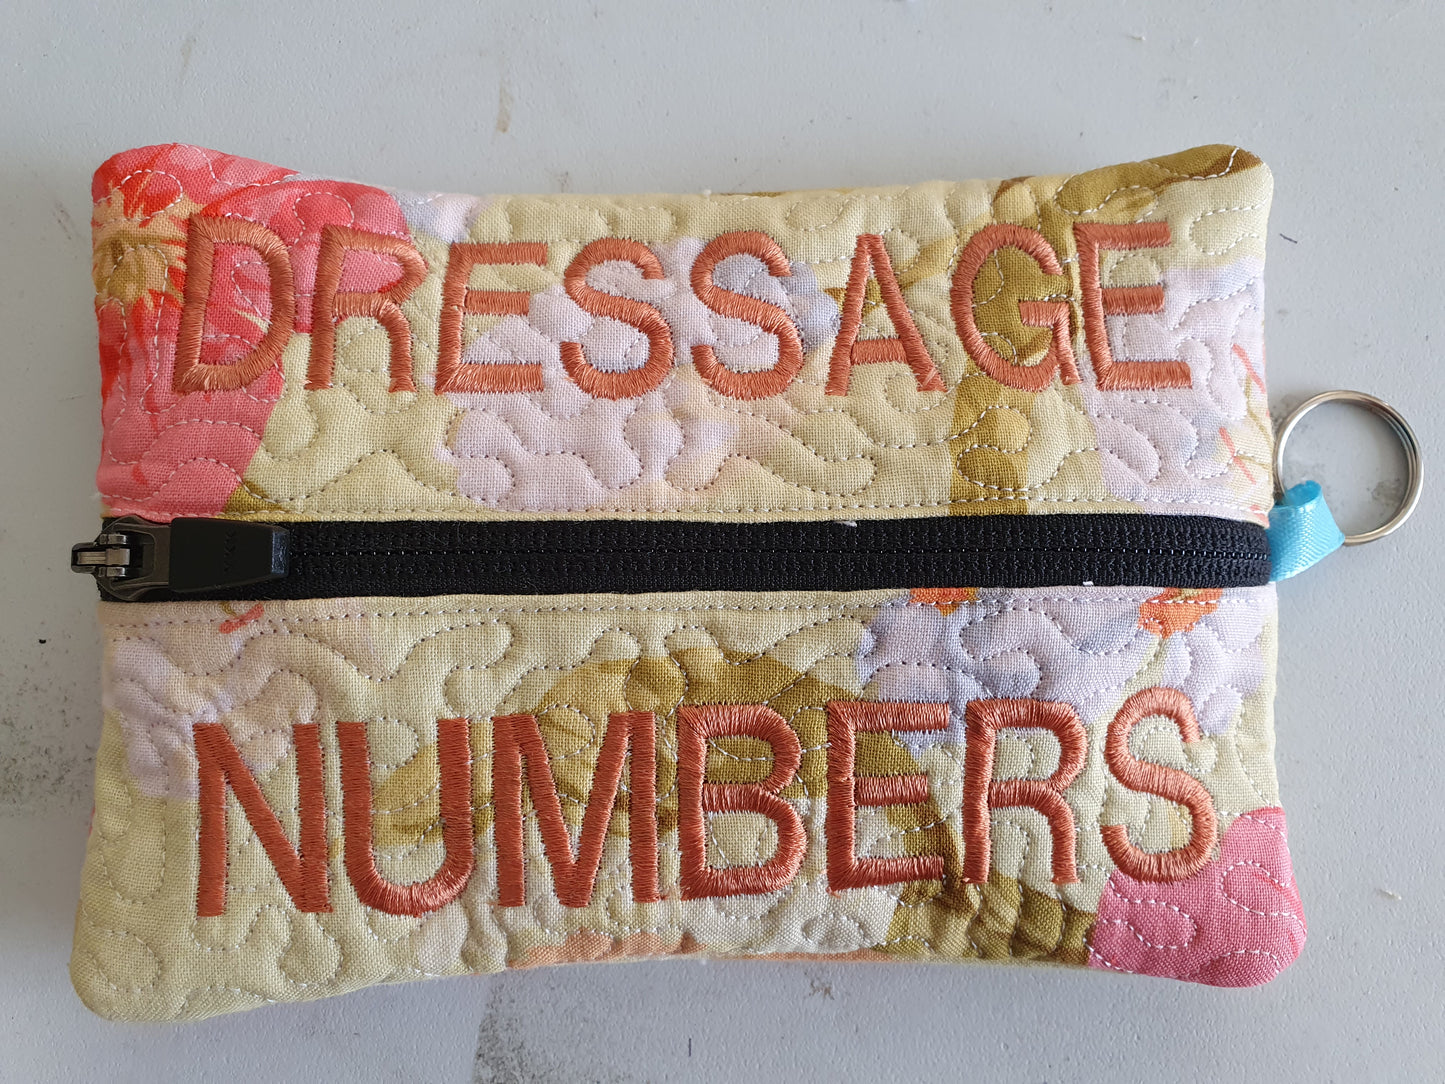 Dressage number handy pouch.